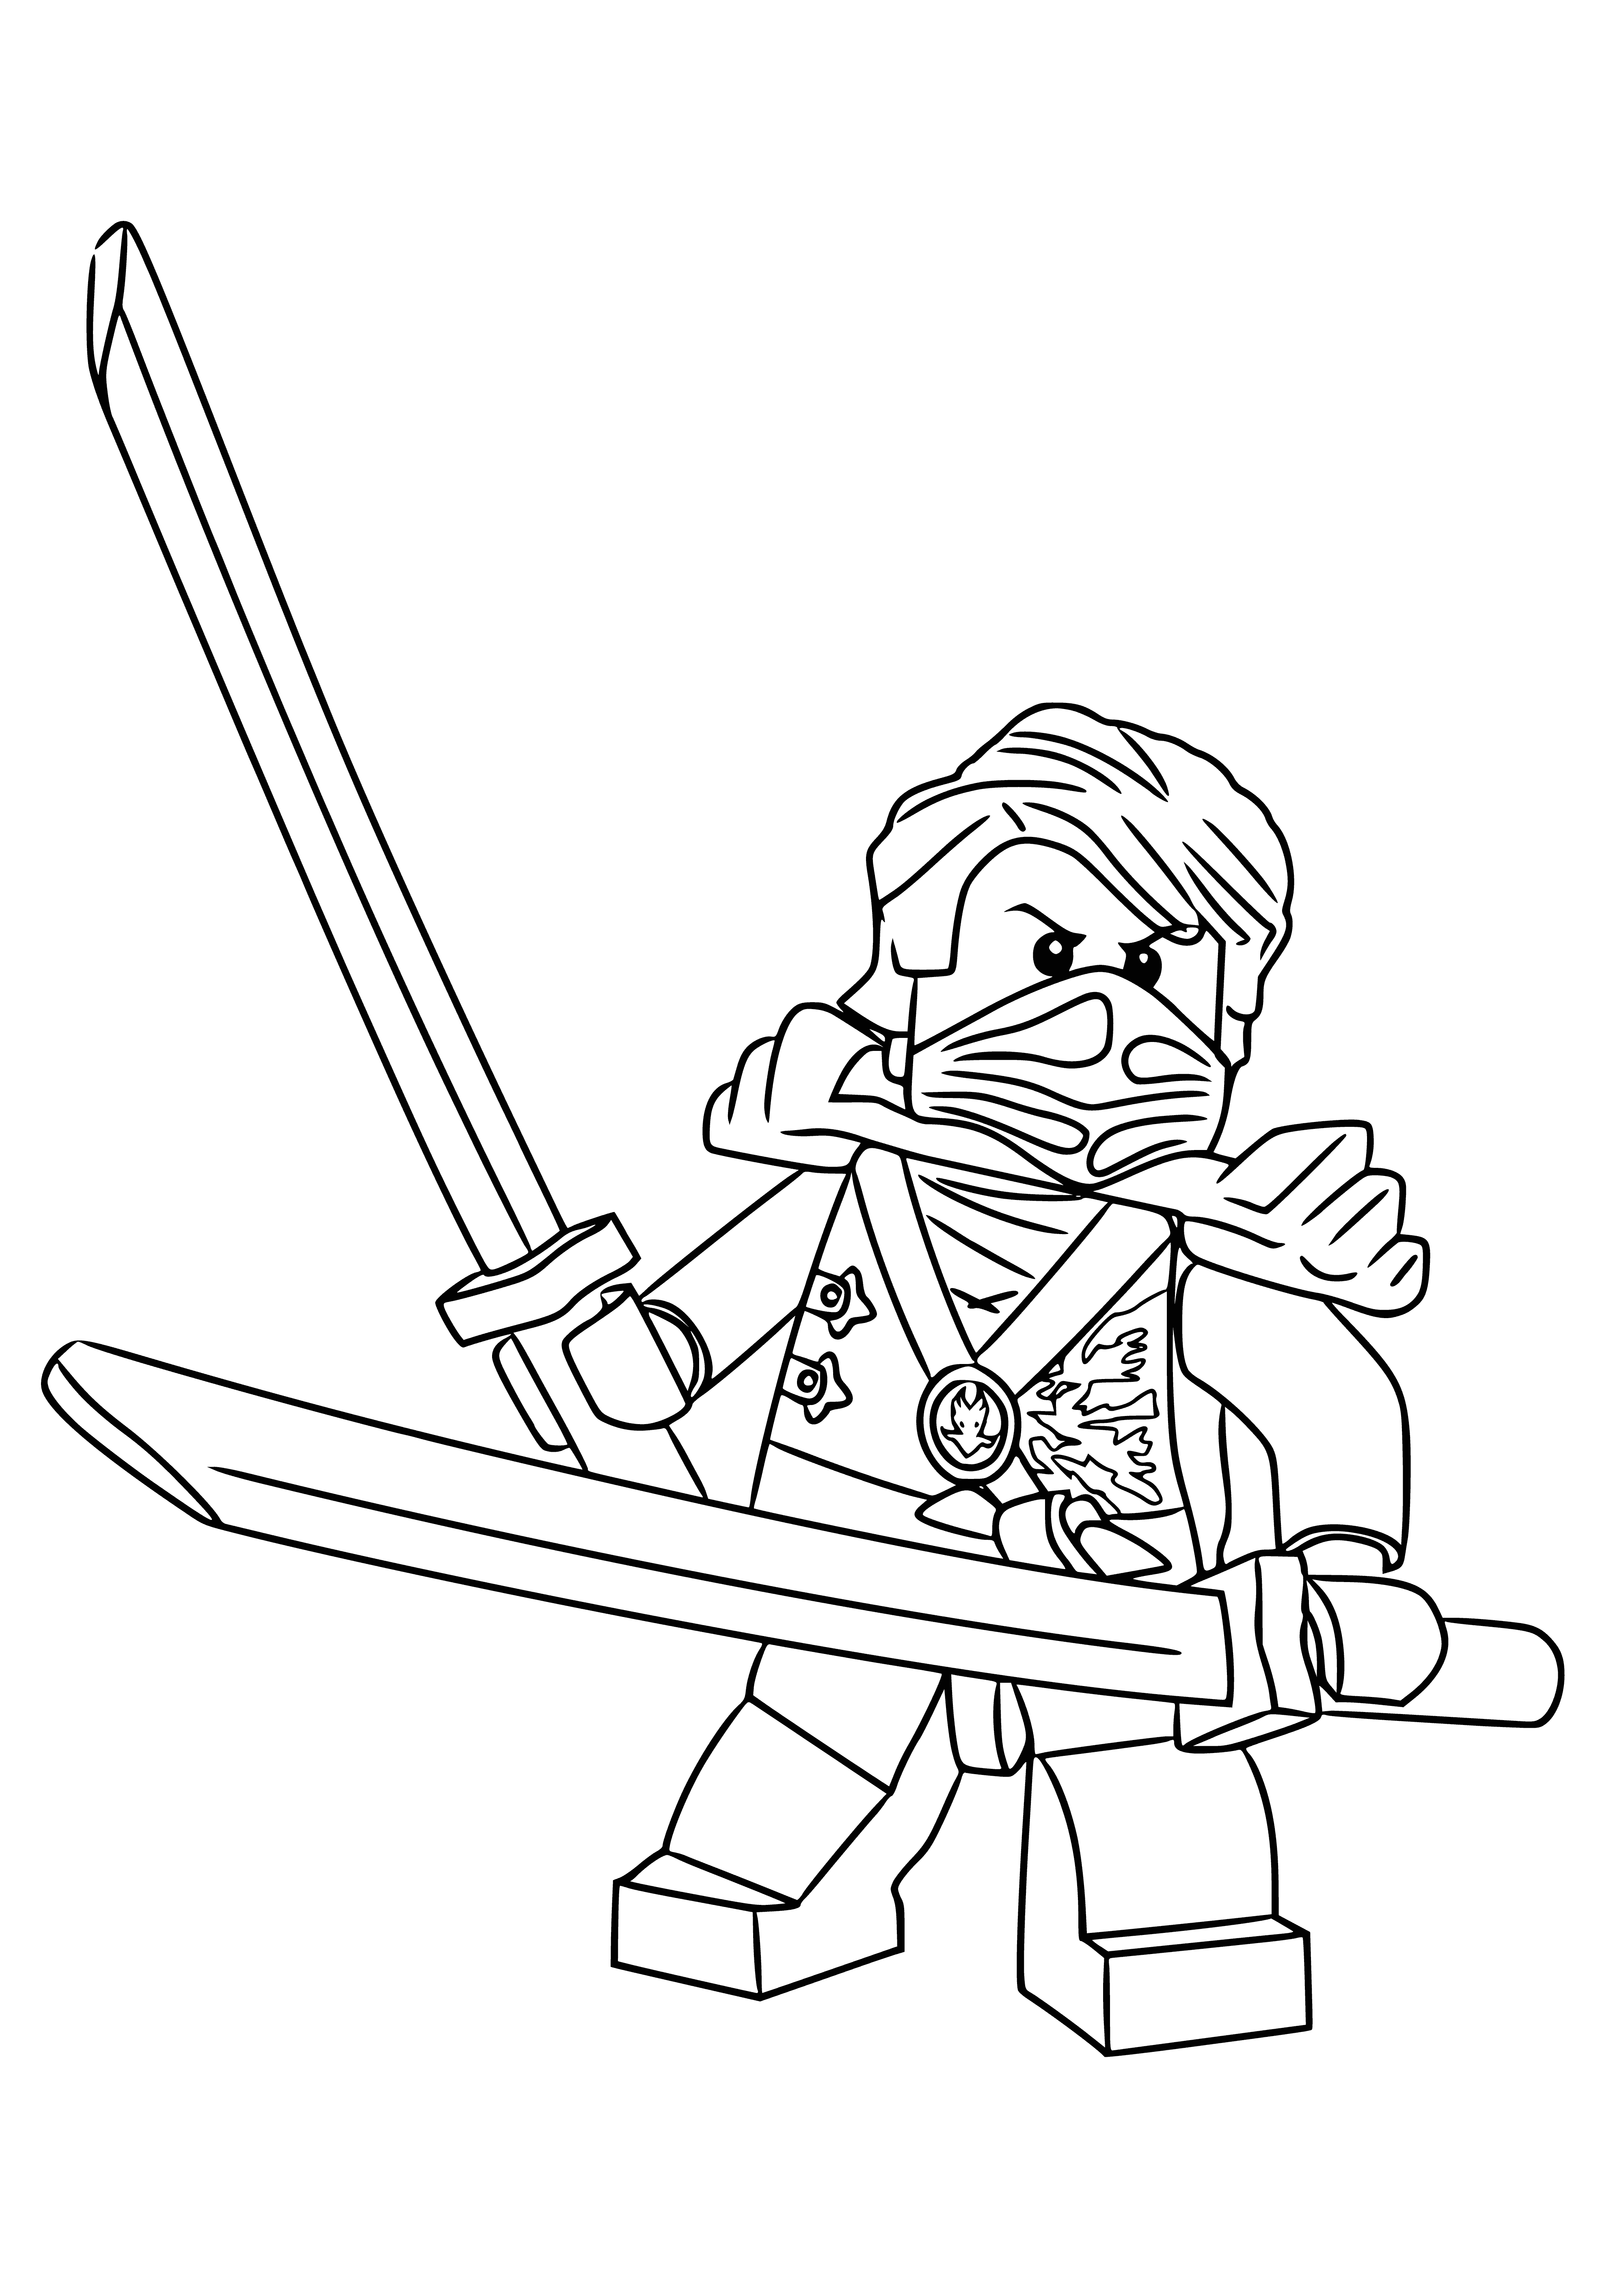 Ninja with swords coloring page